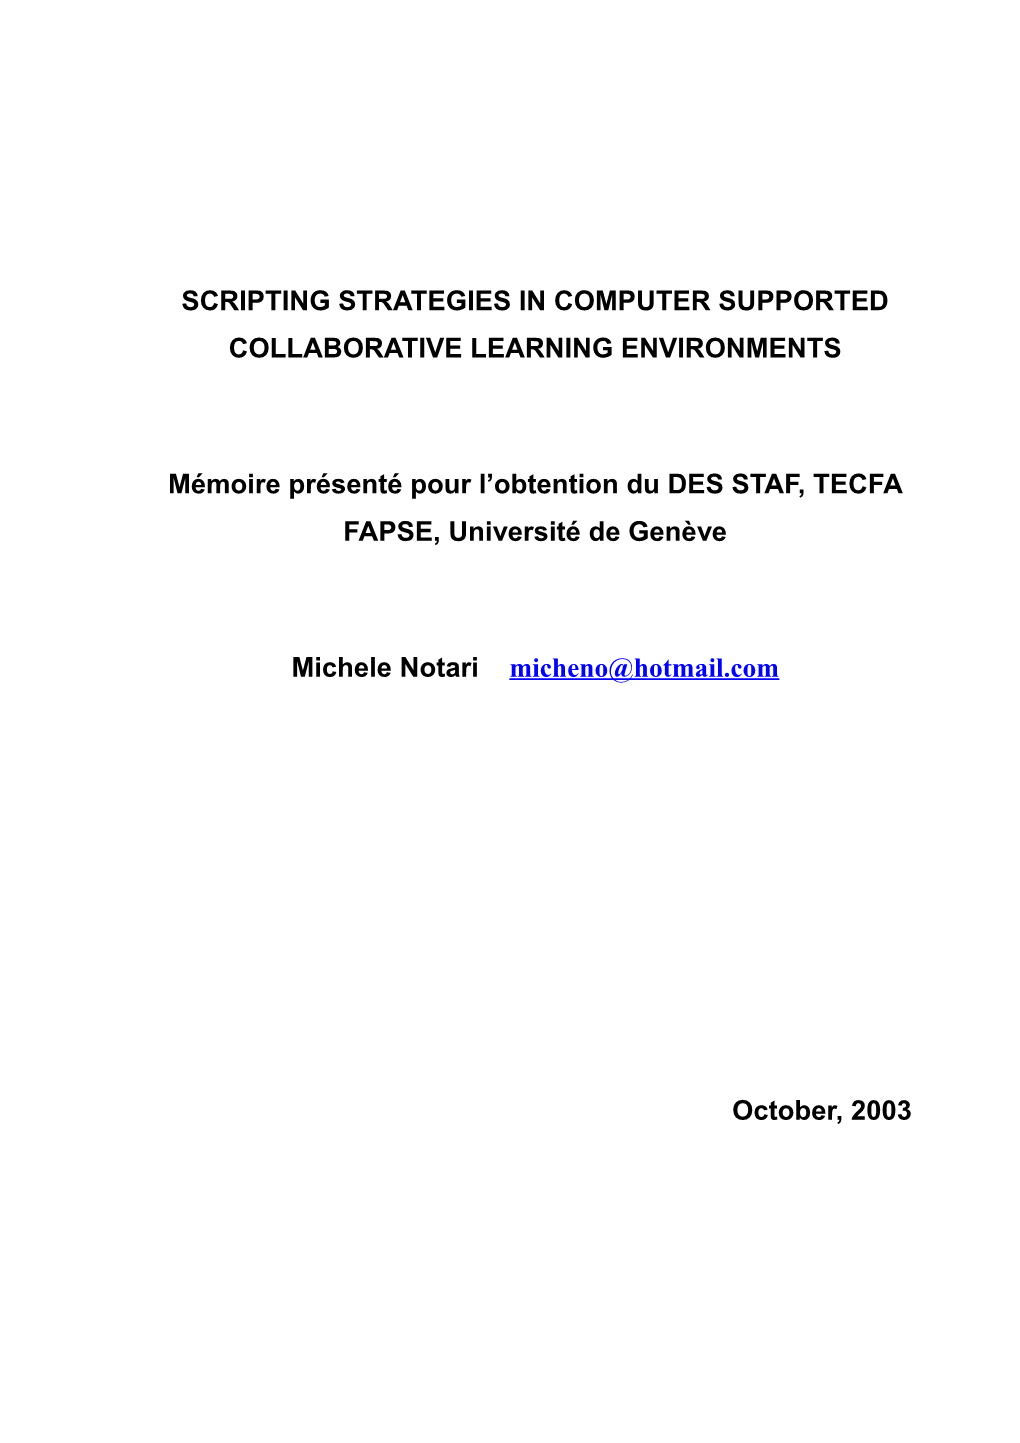 Scripting Strategies in Computer Supported Collaborative Learning Environments